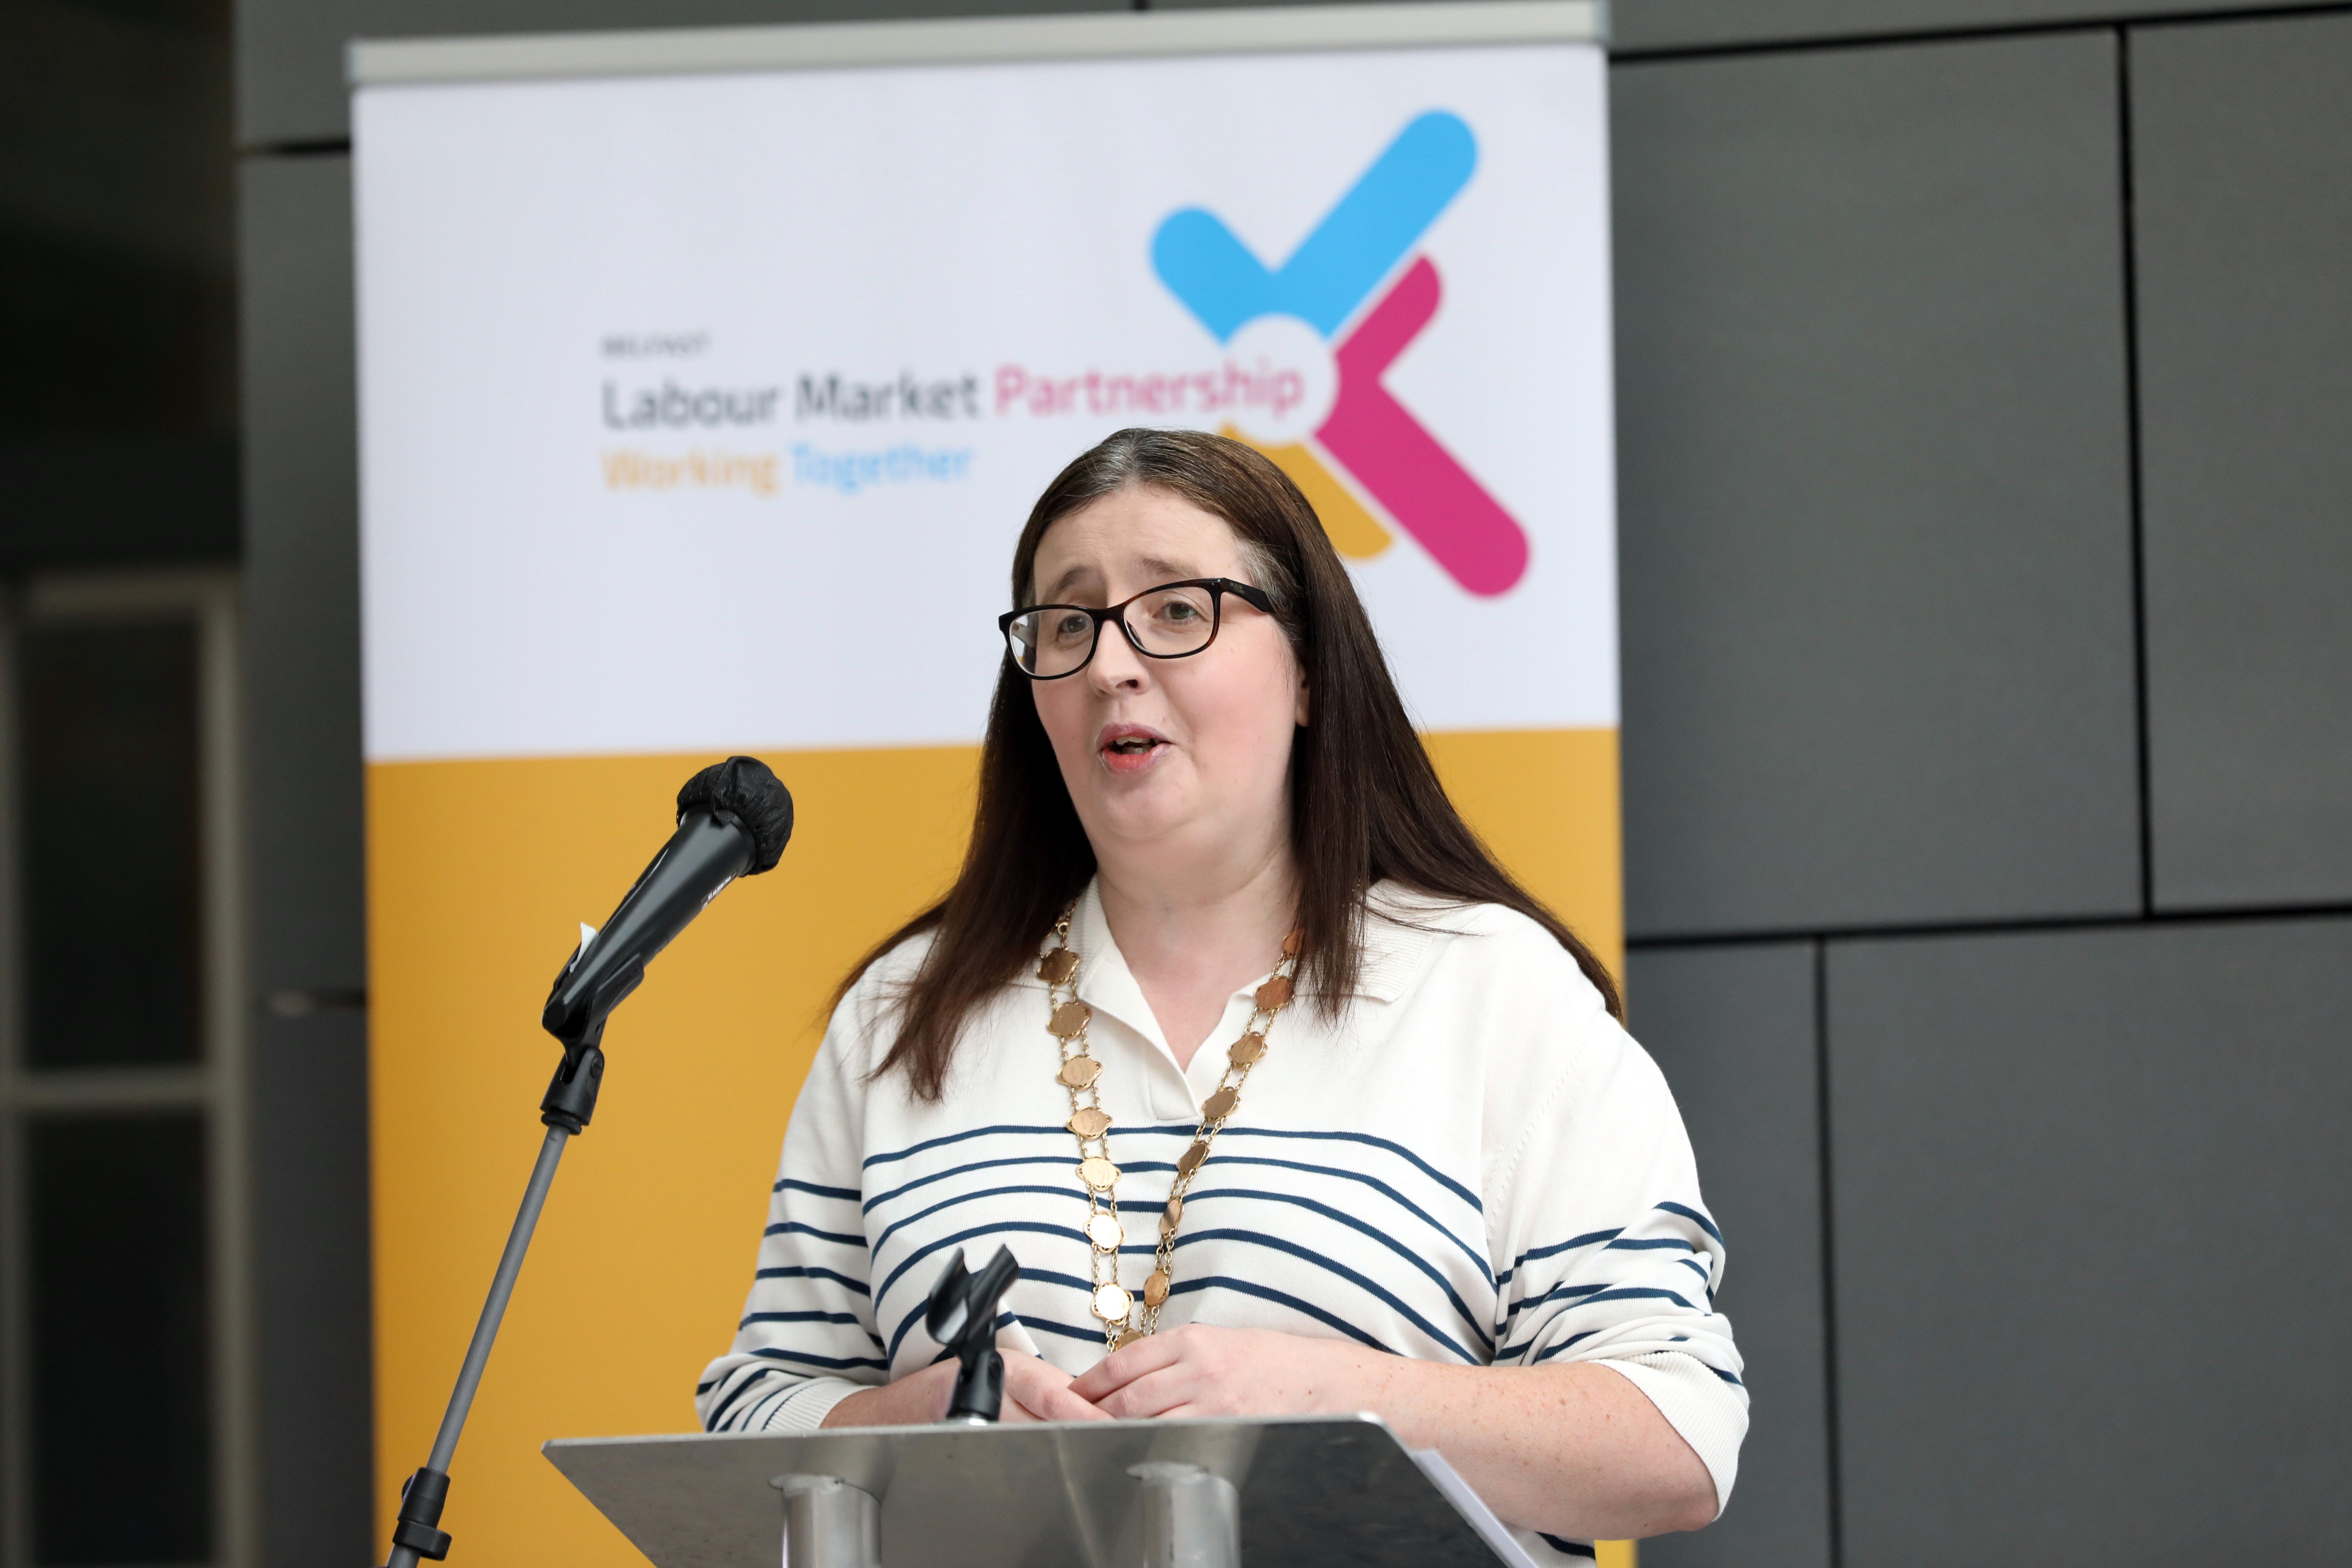 AGENDA: Deputy Lord Mayor Michelle Kelly said that the Labour Market Partnership forms part of the wider Belfast Agenda